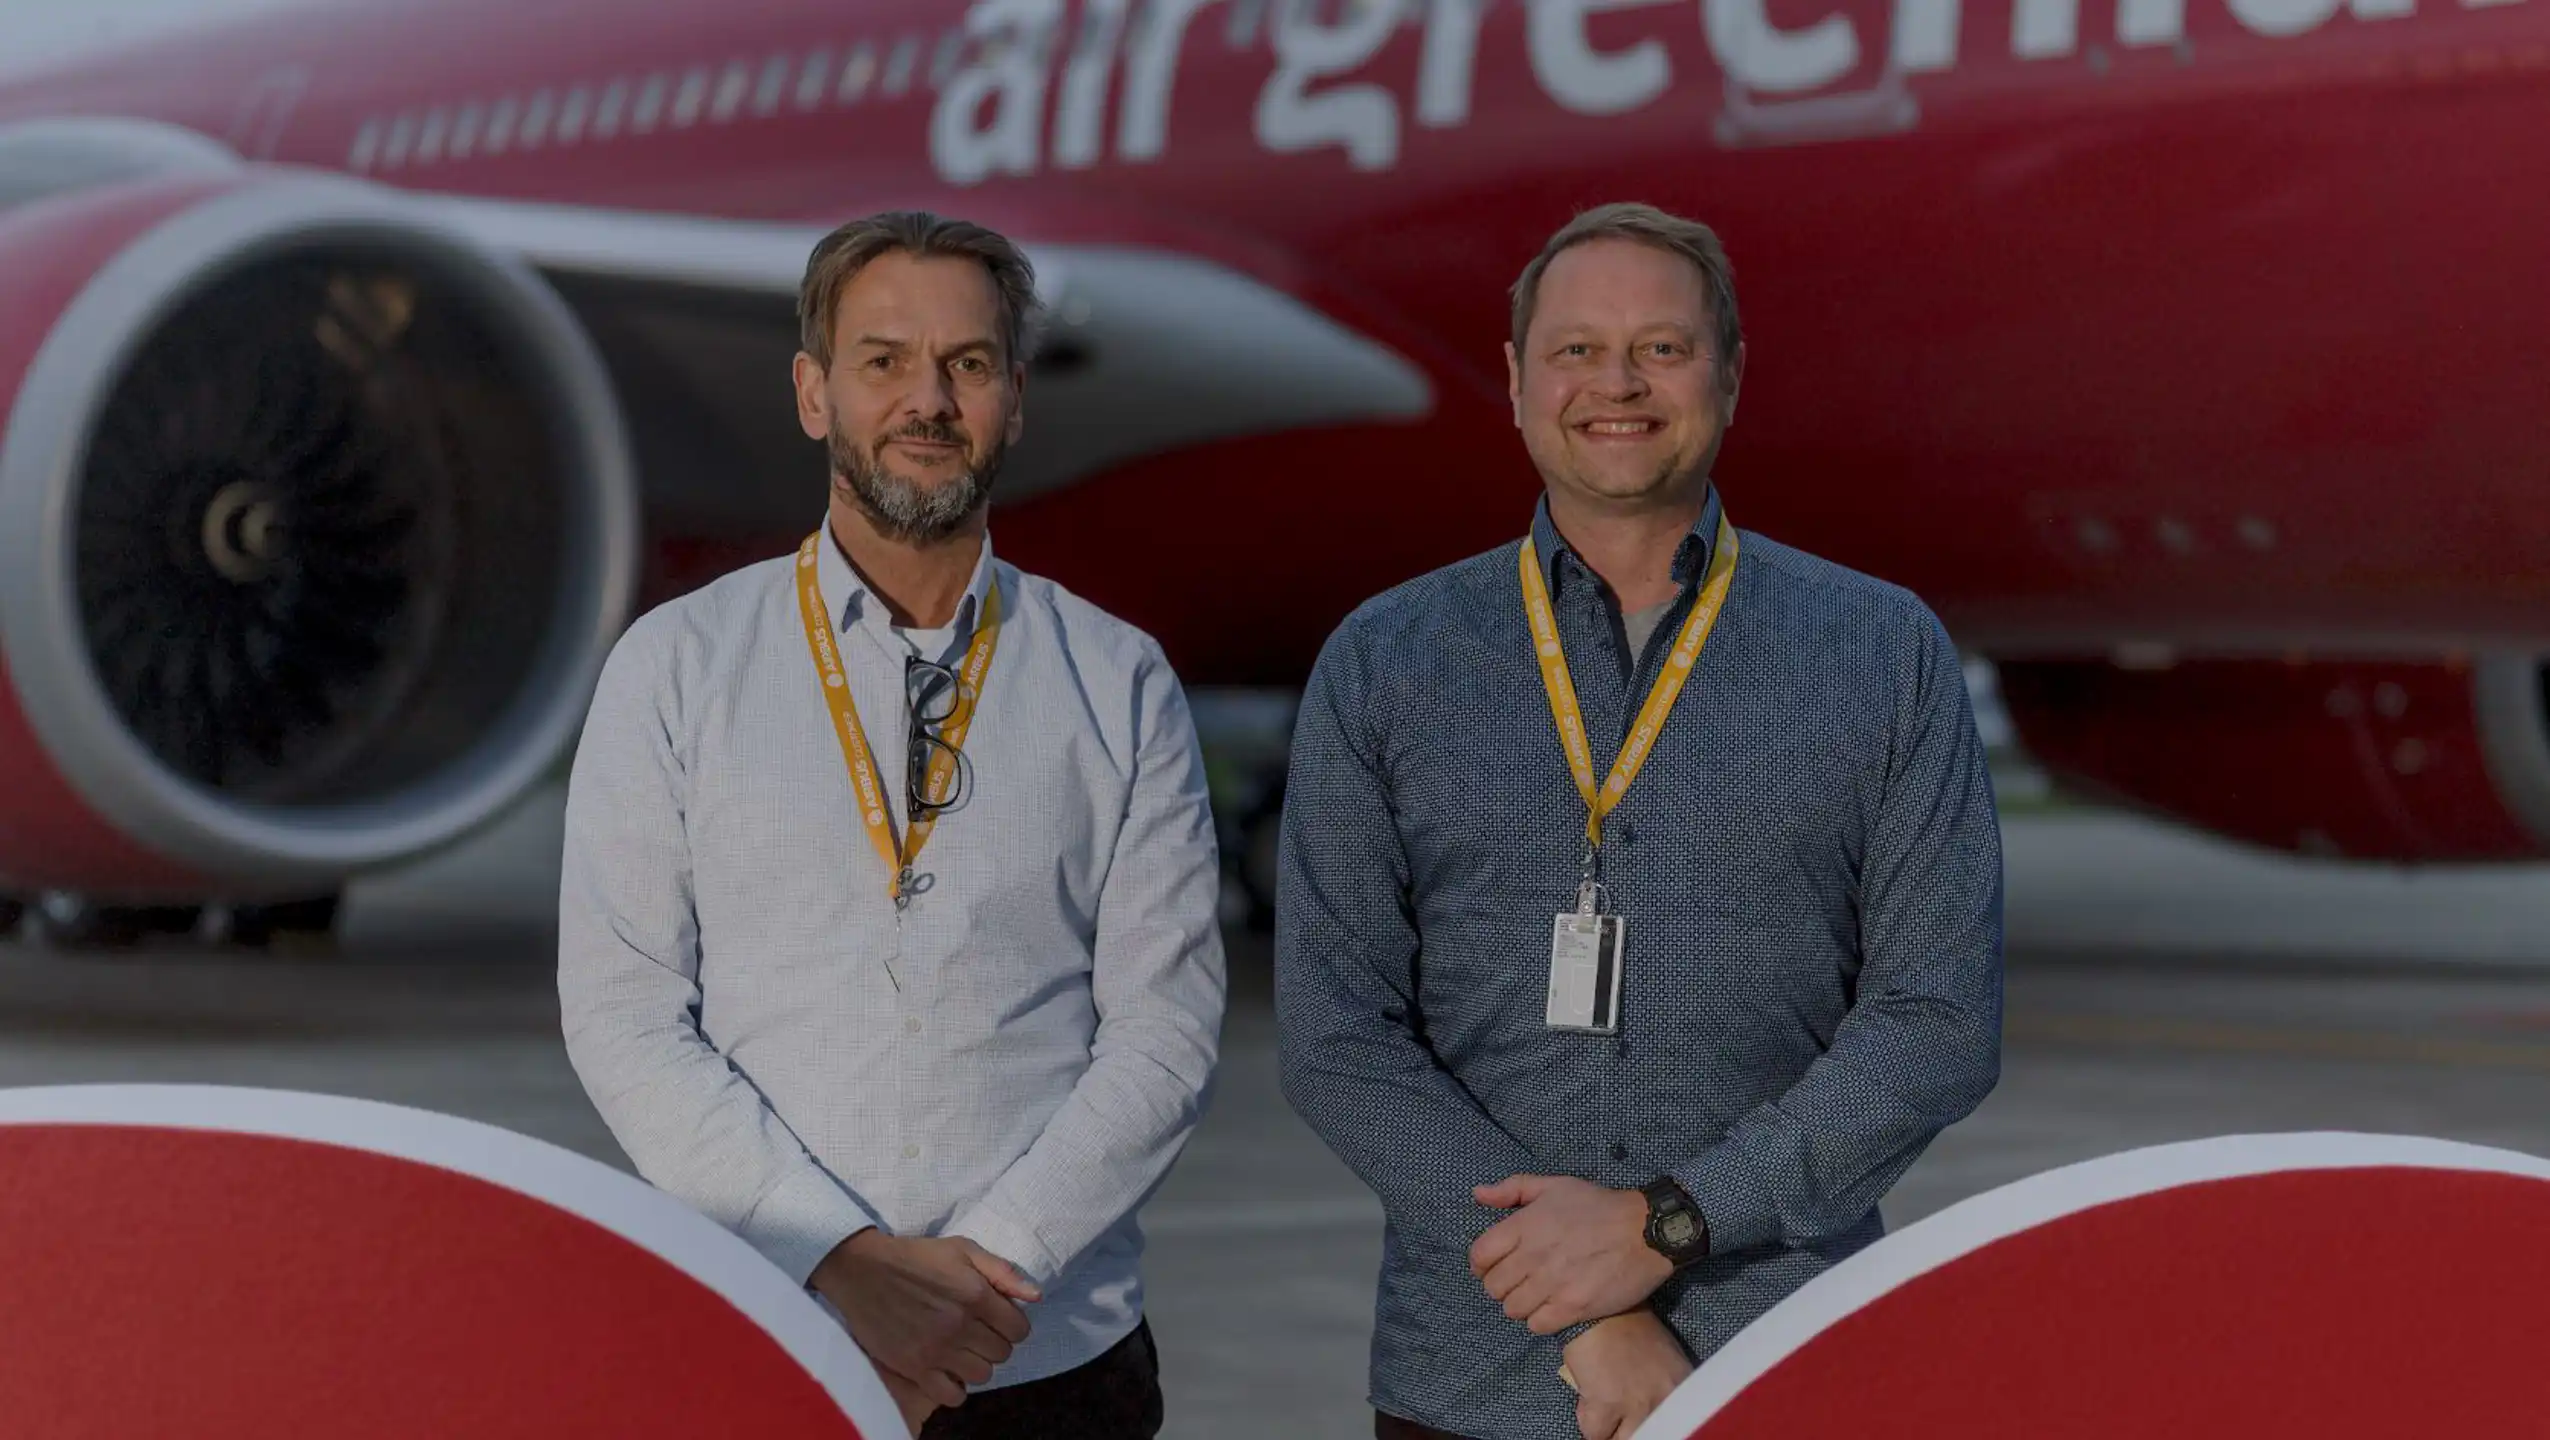 Technical Manager, Henrik Keil and Michael Linder, Technical Coordinator are also on board for the ferry flight to Arizona together with two representatives from the buyers, AAR SUPPLY CHAIN. The picture is Henrik on the left and Michael on the right and was taken at the handover of Tuukkaq, which now awaits their full attention, care and nurturing.